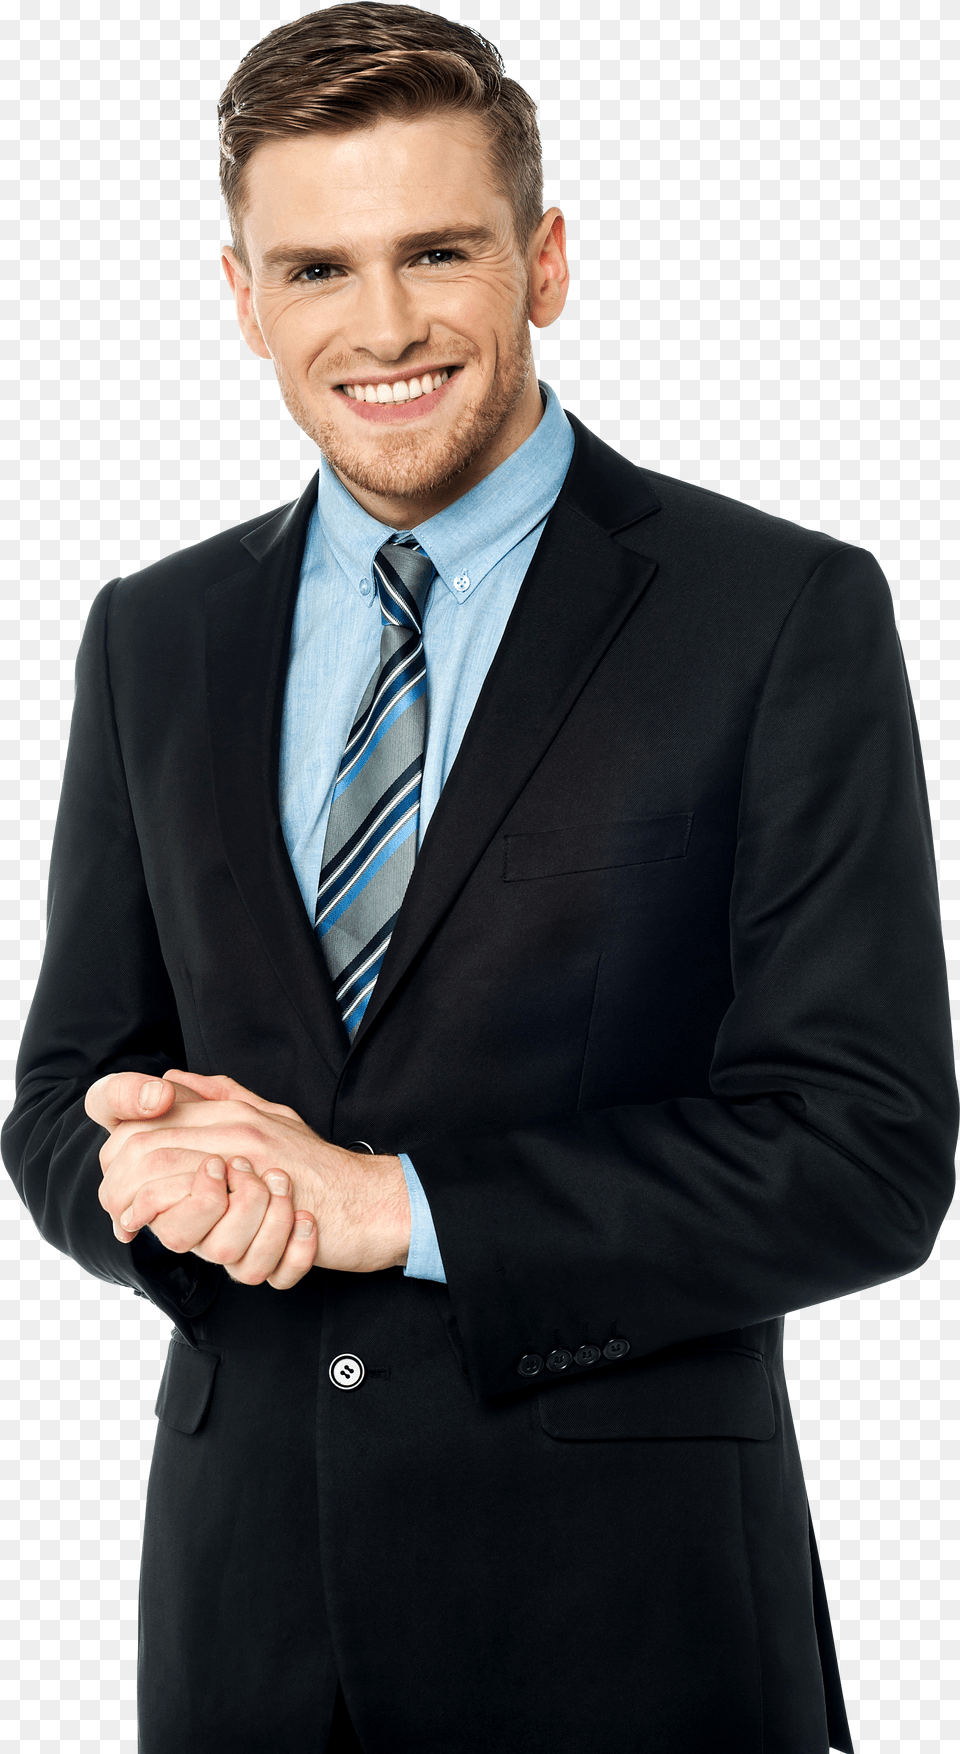 Man In A Suit Png Image